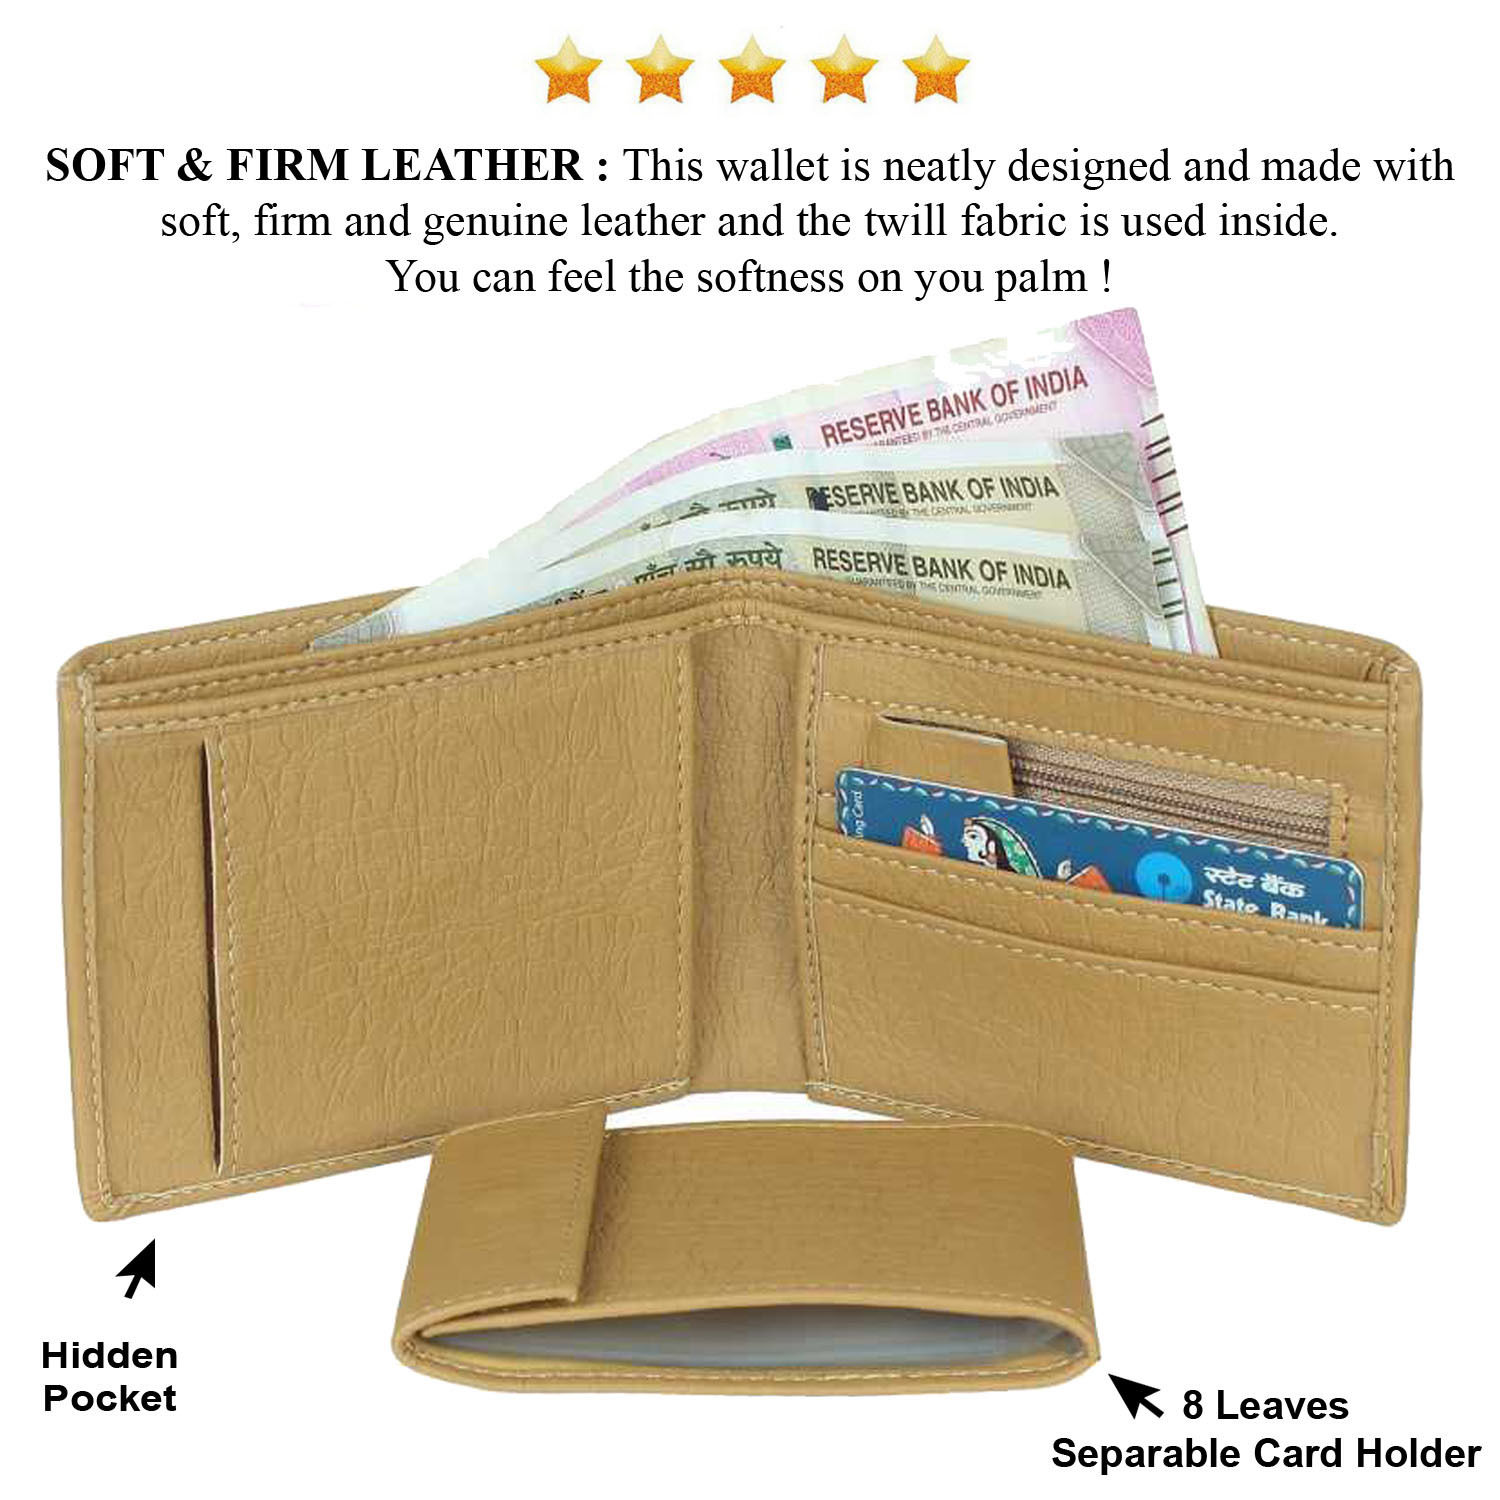 Hunza Embroidered Gents mini purse /wallet | Gents wallet, Mini purse,  Wallet